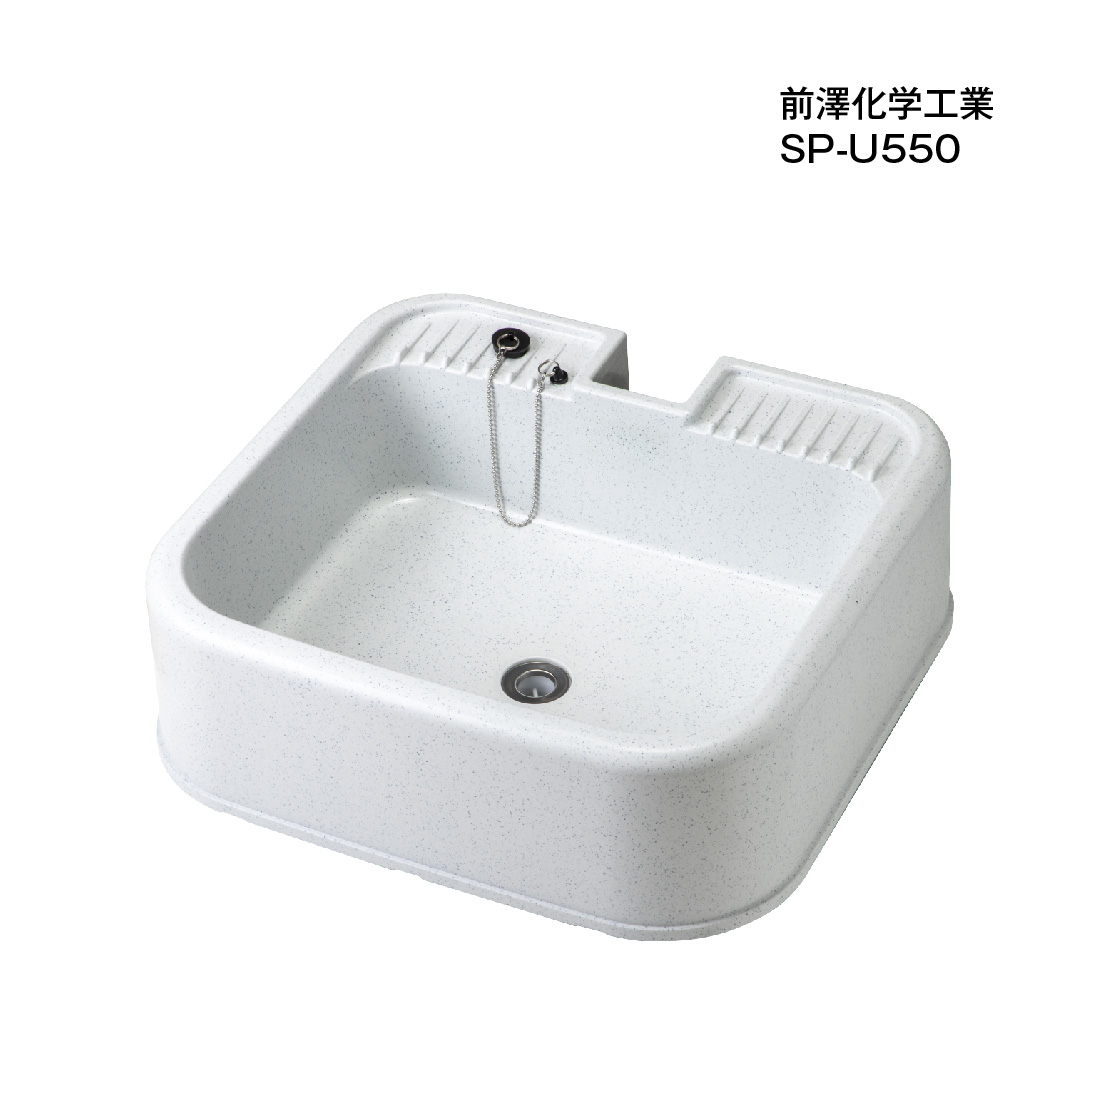  front ... industry mae The wa faucet bread embedded type anti-bacterial specification SP-U550 550mm PP made 